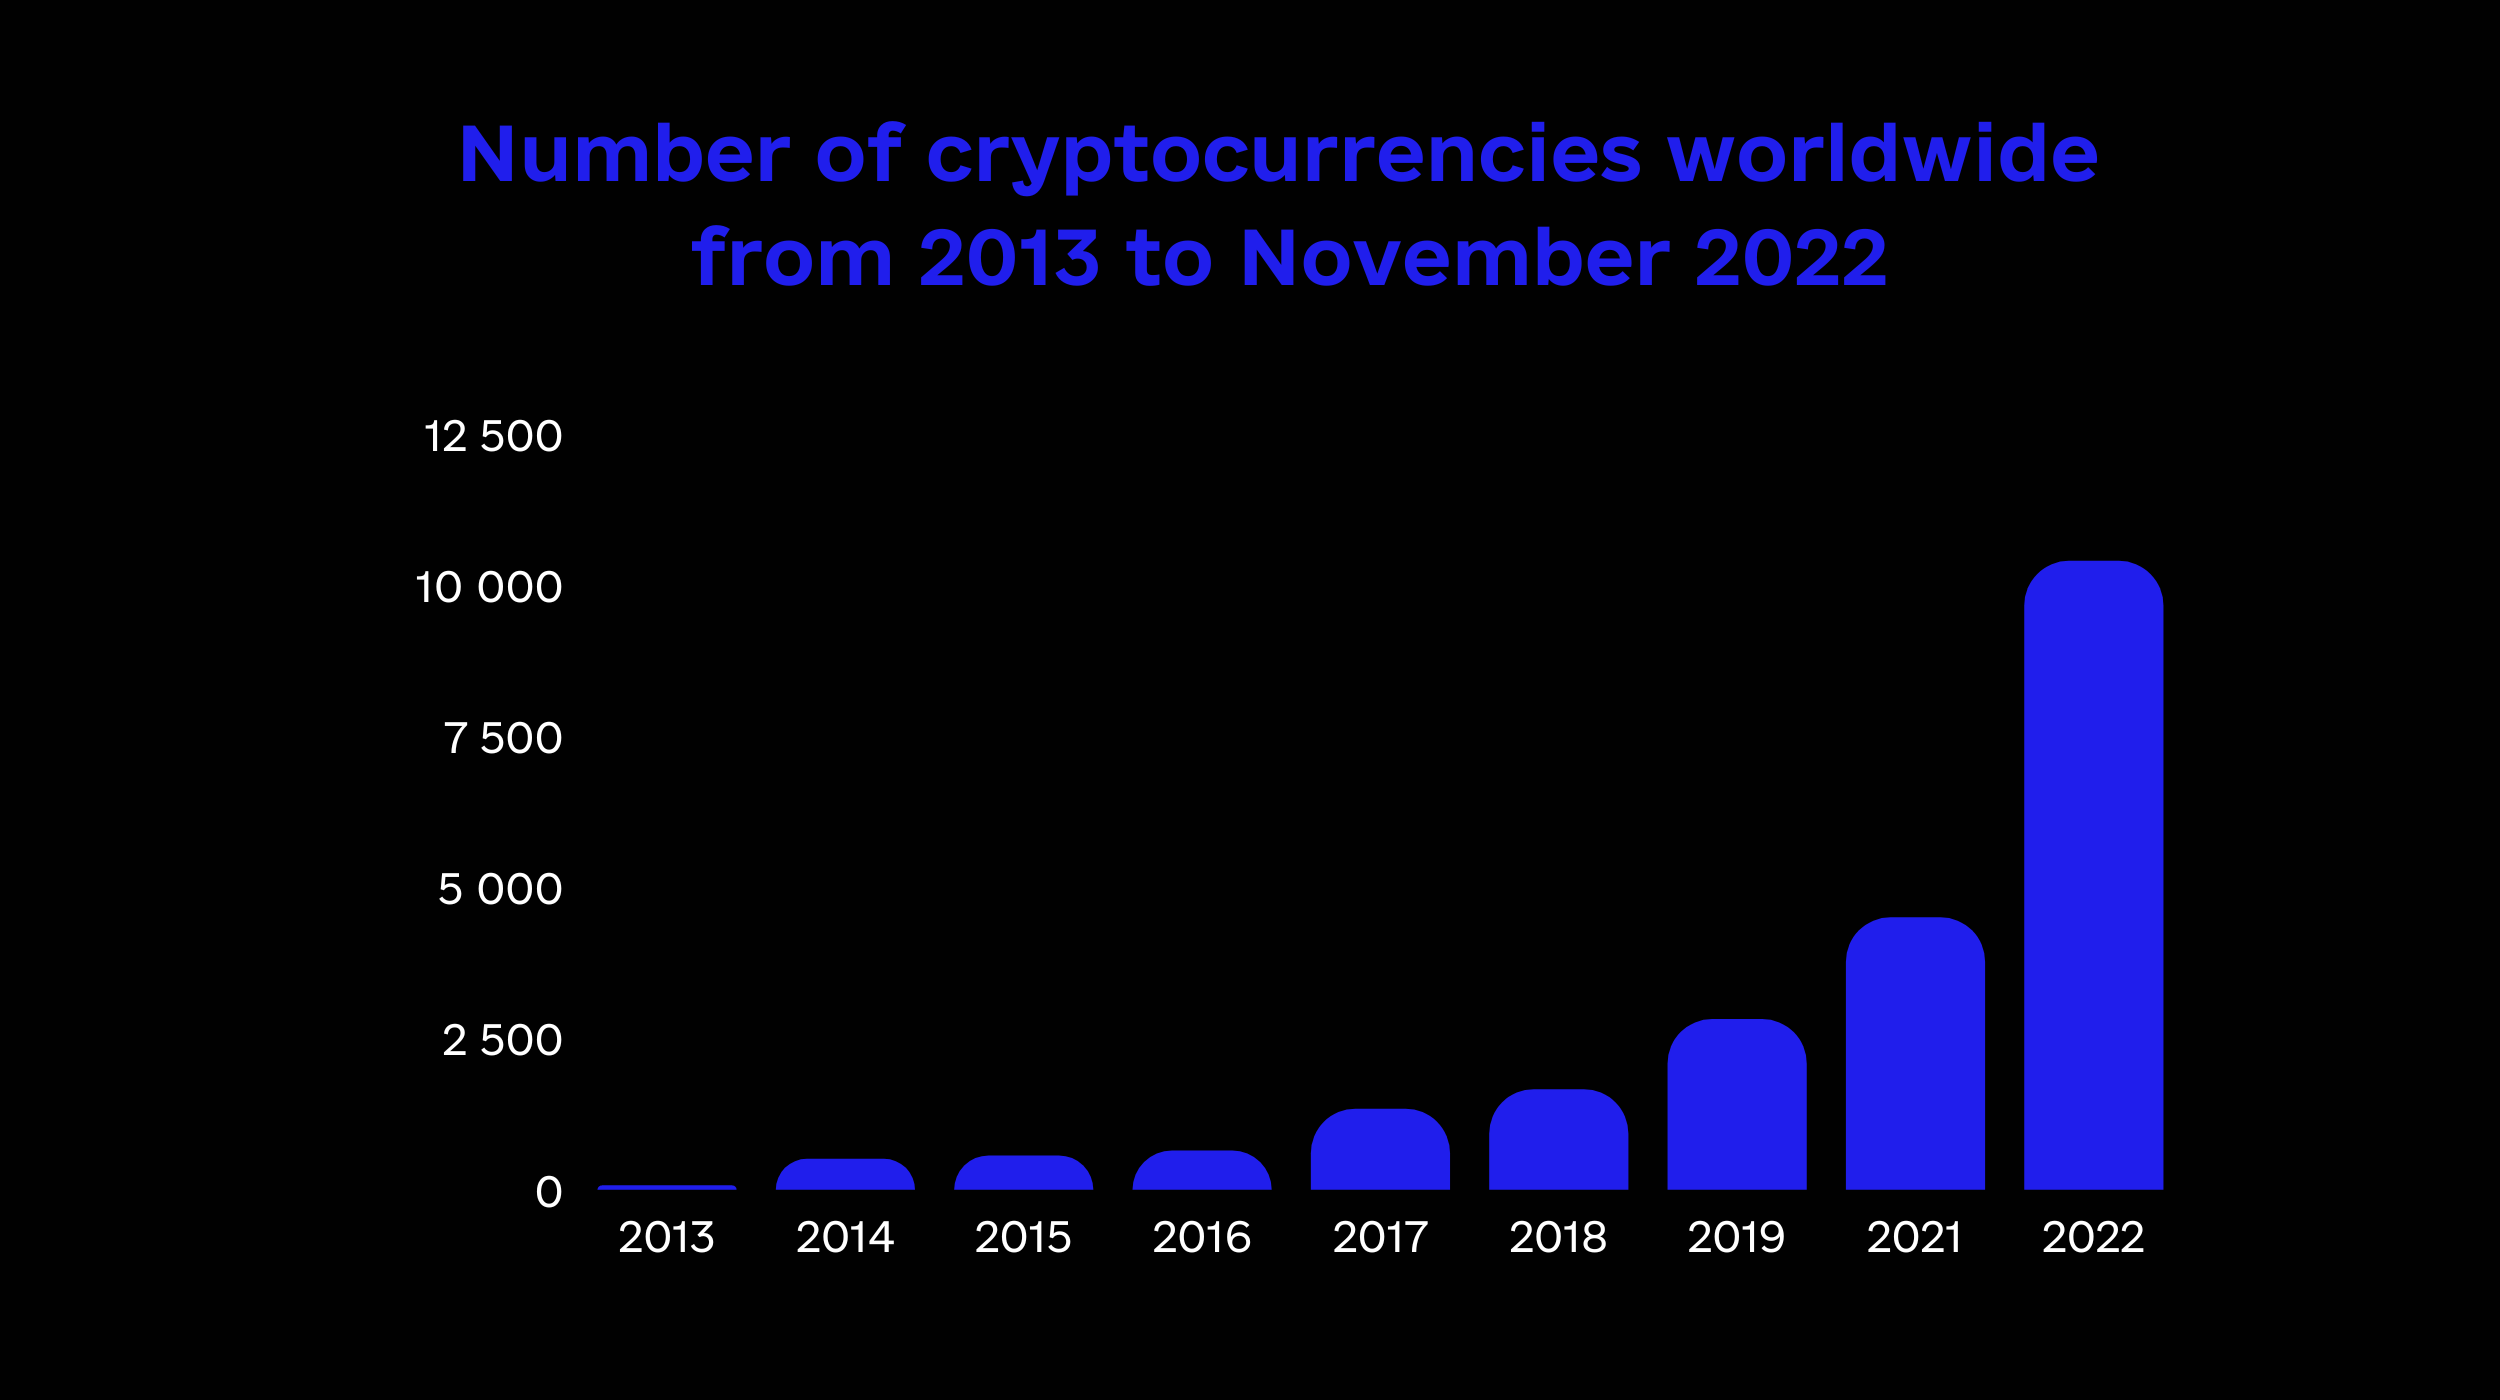 Number of cryptocurrencies worldwide from 2013 to November 2022